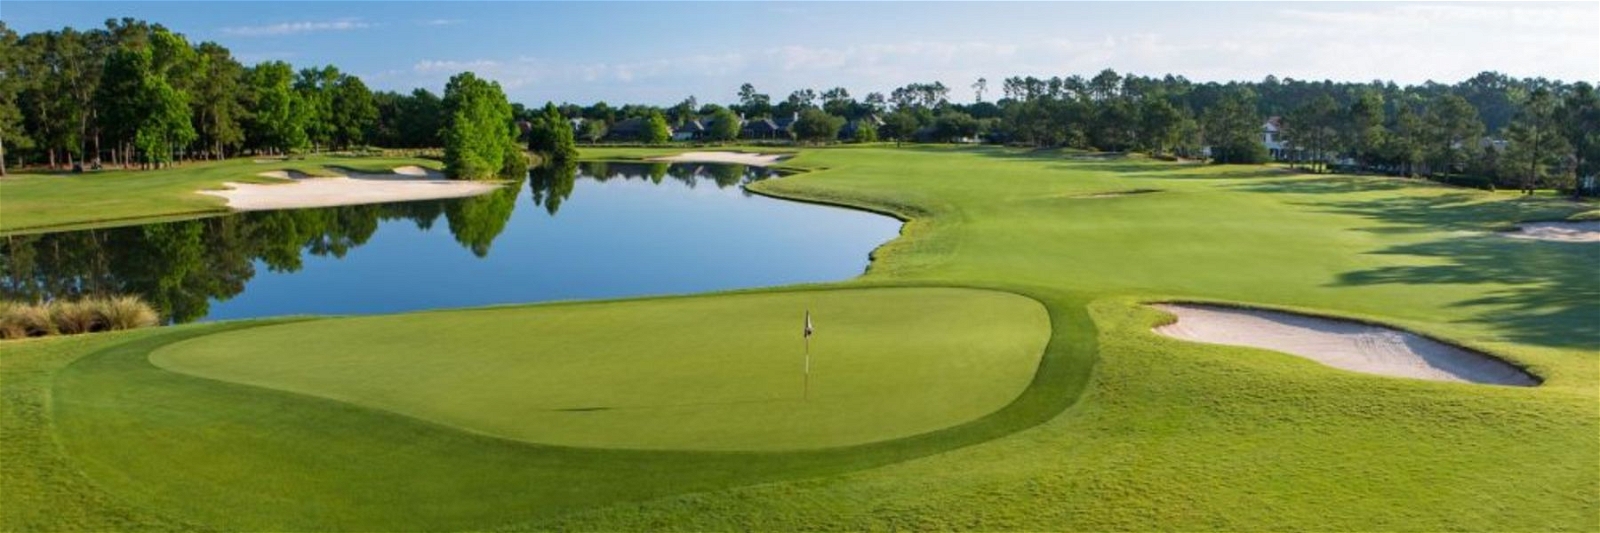 Golf Vacation Package - World Golf Village Stay & Play from $275, Plus free PLAYERS Tix!